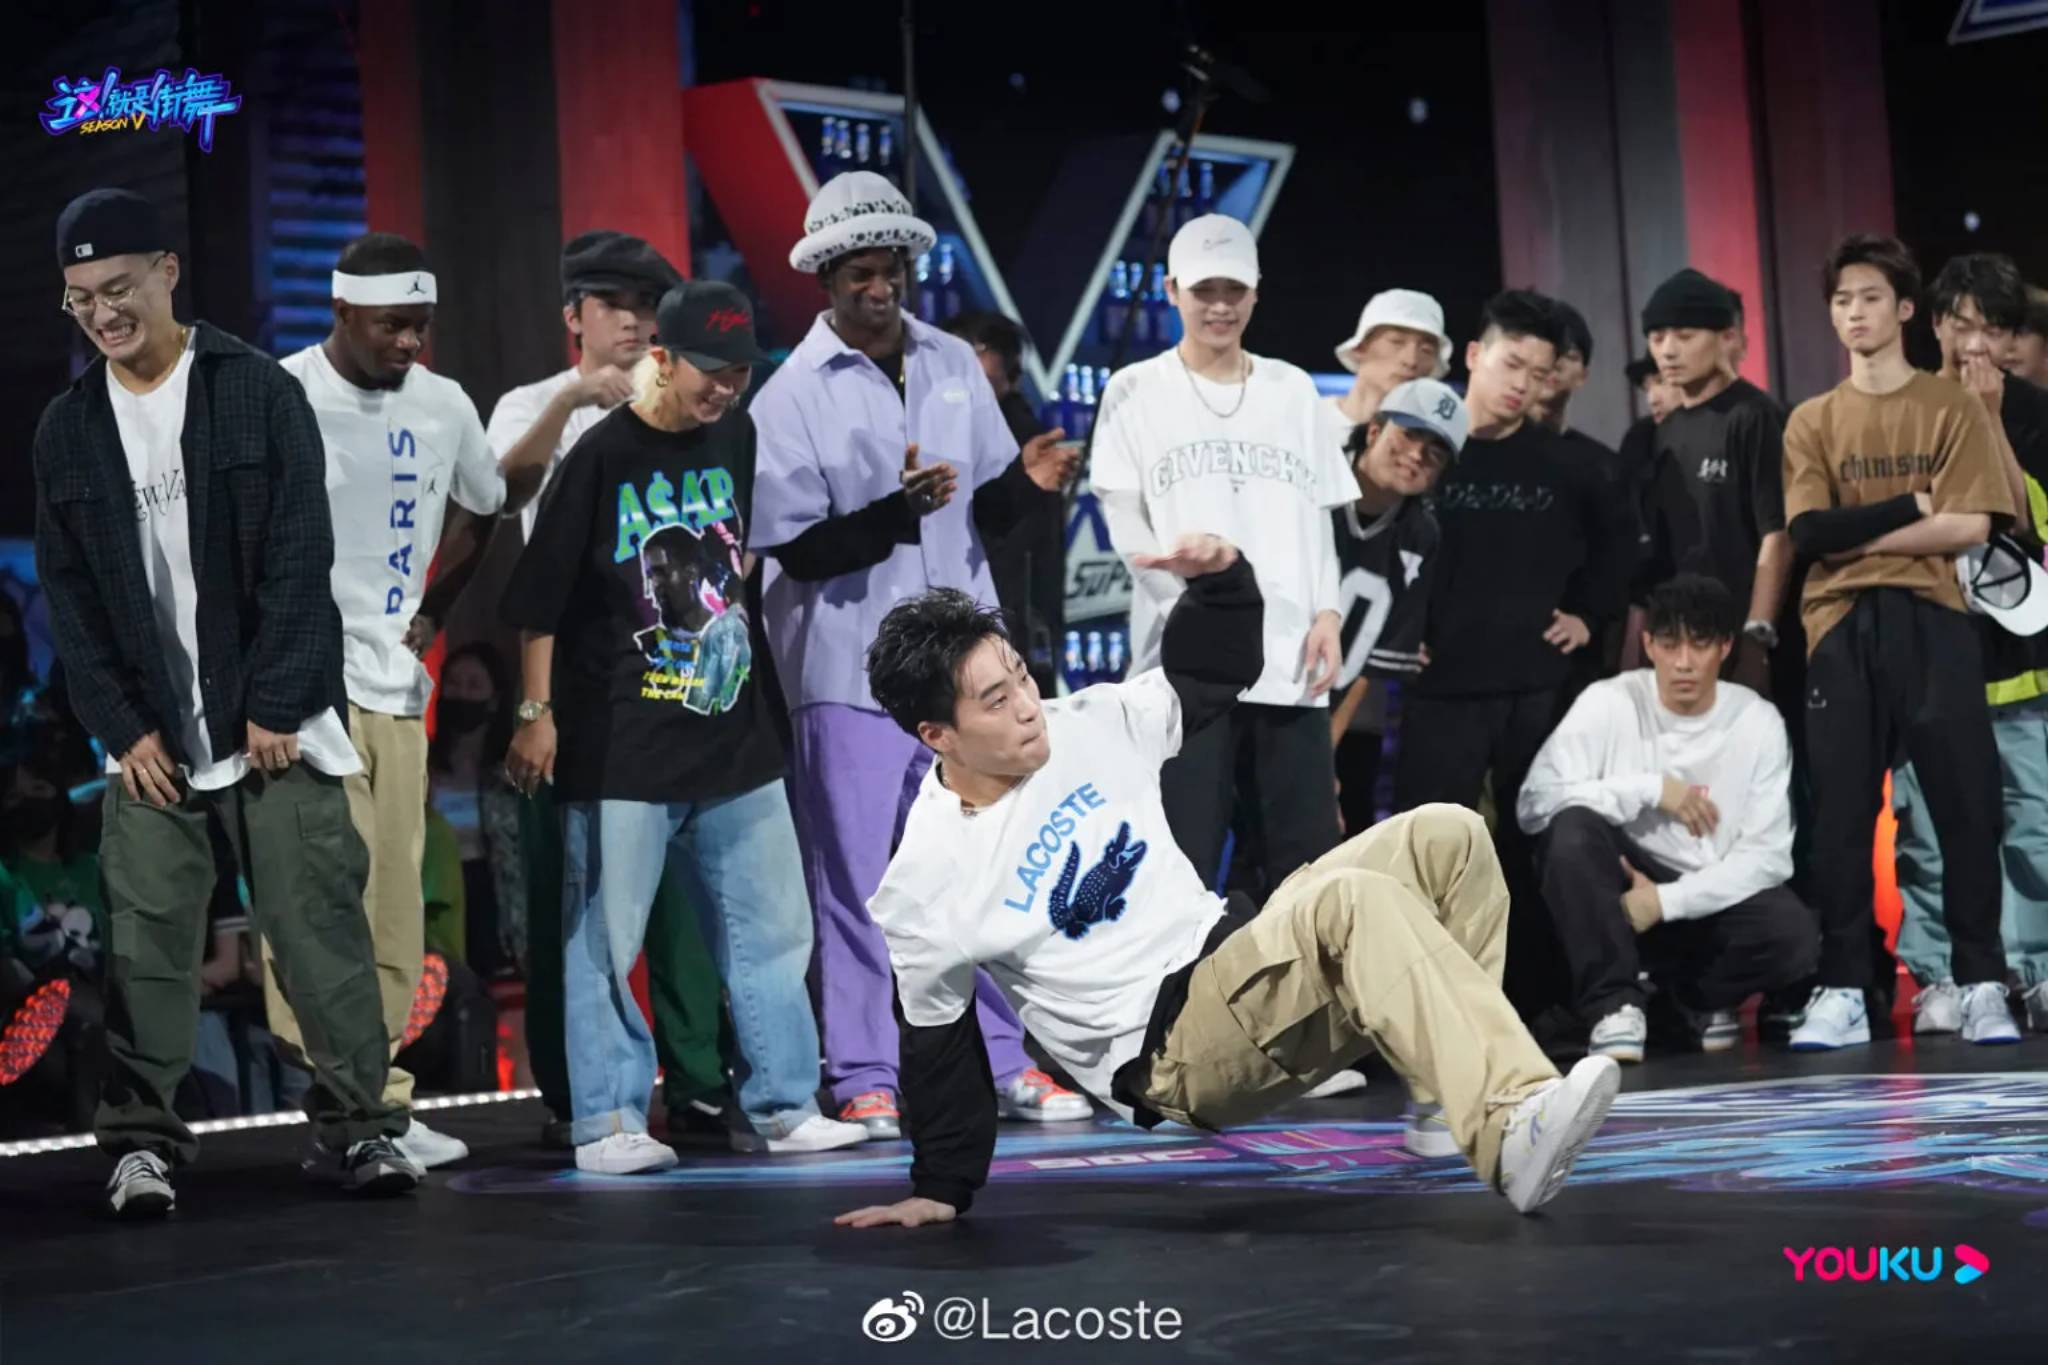 Lacoste: engaging Chinese Gen Z through street dance